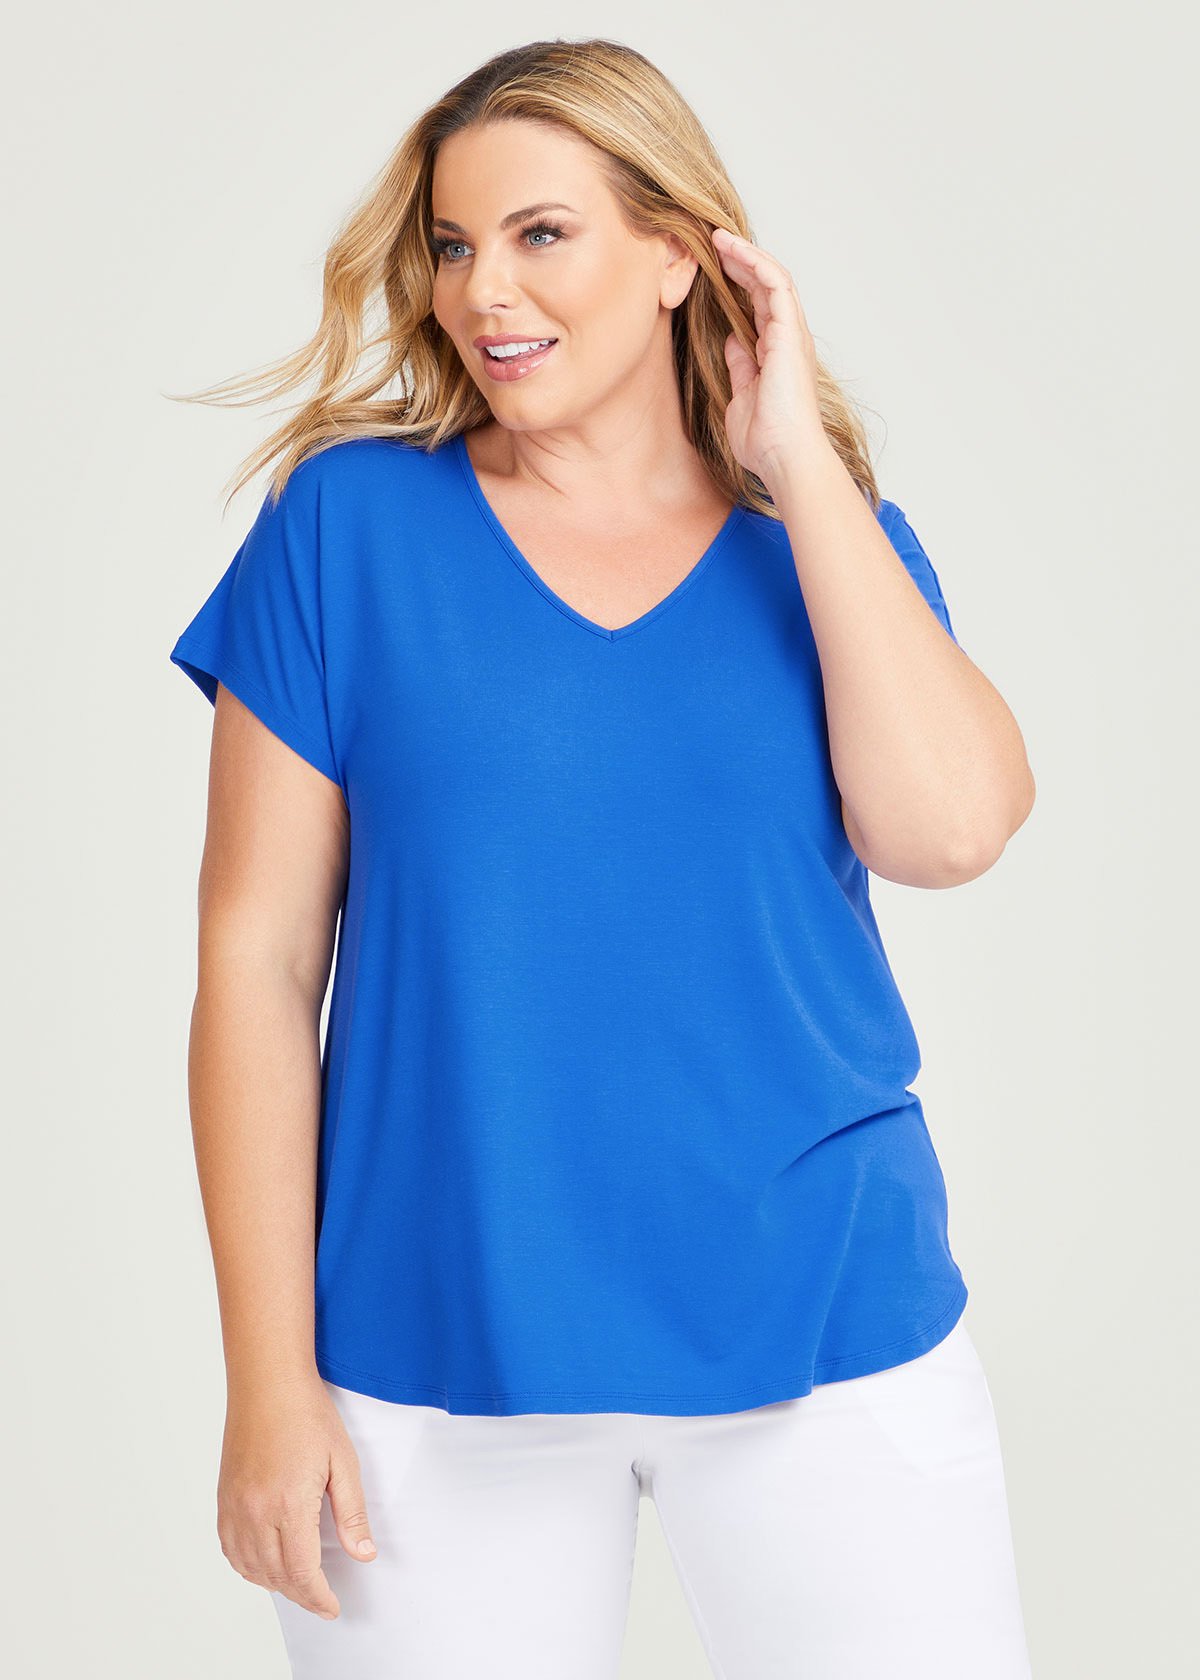 Shop Plus Size Natural Everyday V-neck Top in Blue | Sizes 12-30 ...